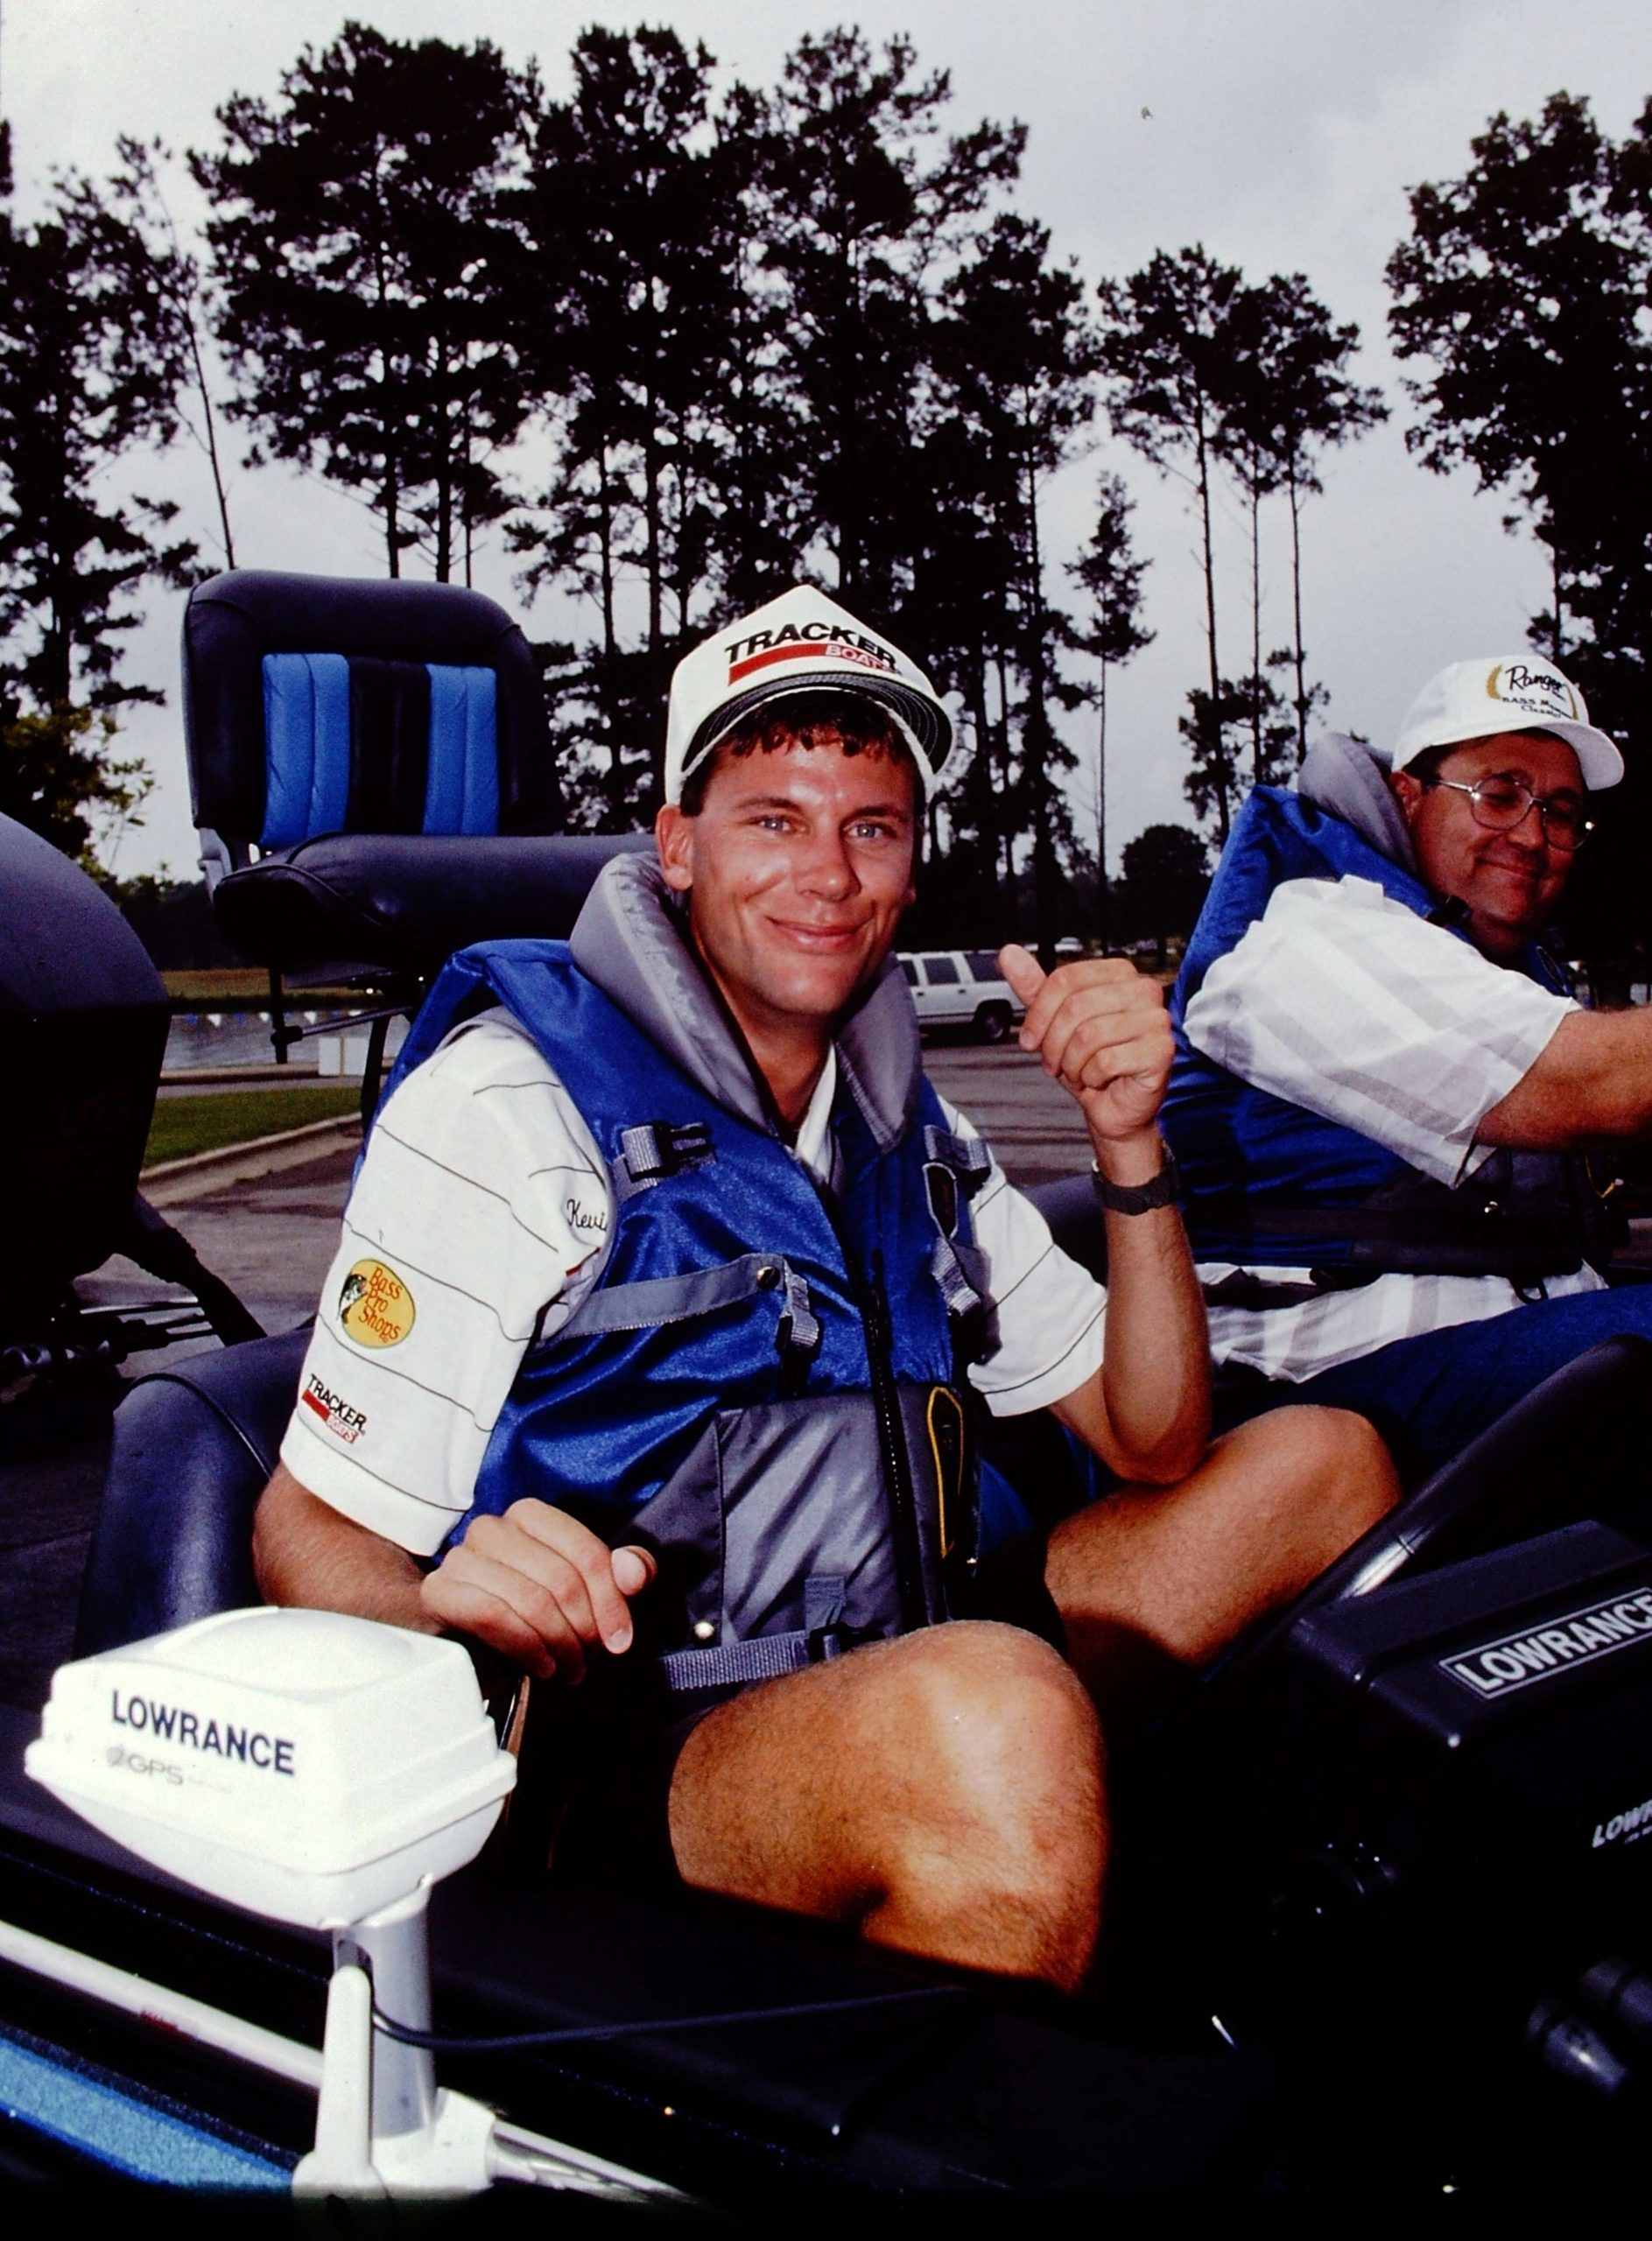 <b>1992</b><br>That title came in only his second season on the Bassmaster Tour, but his dominance wouldn't be solidified for several years.